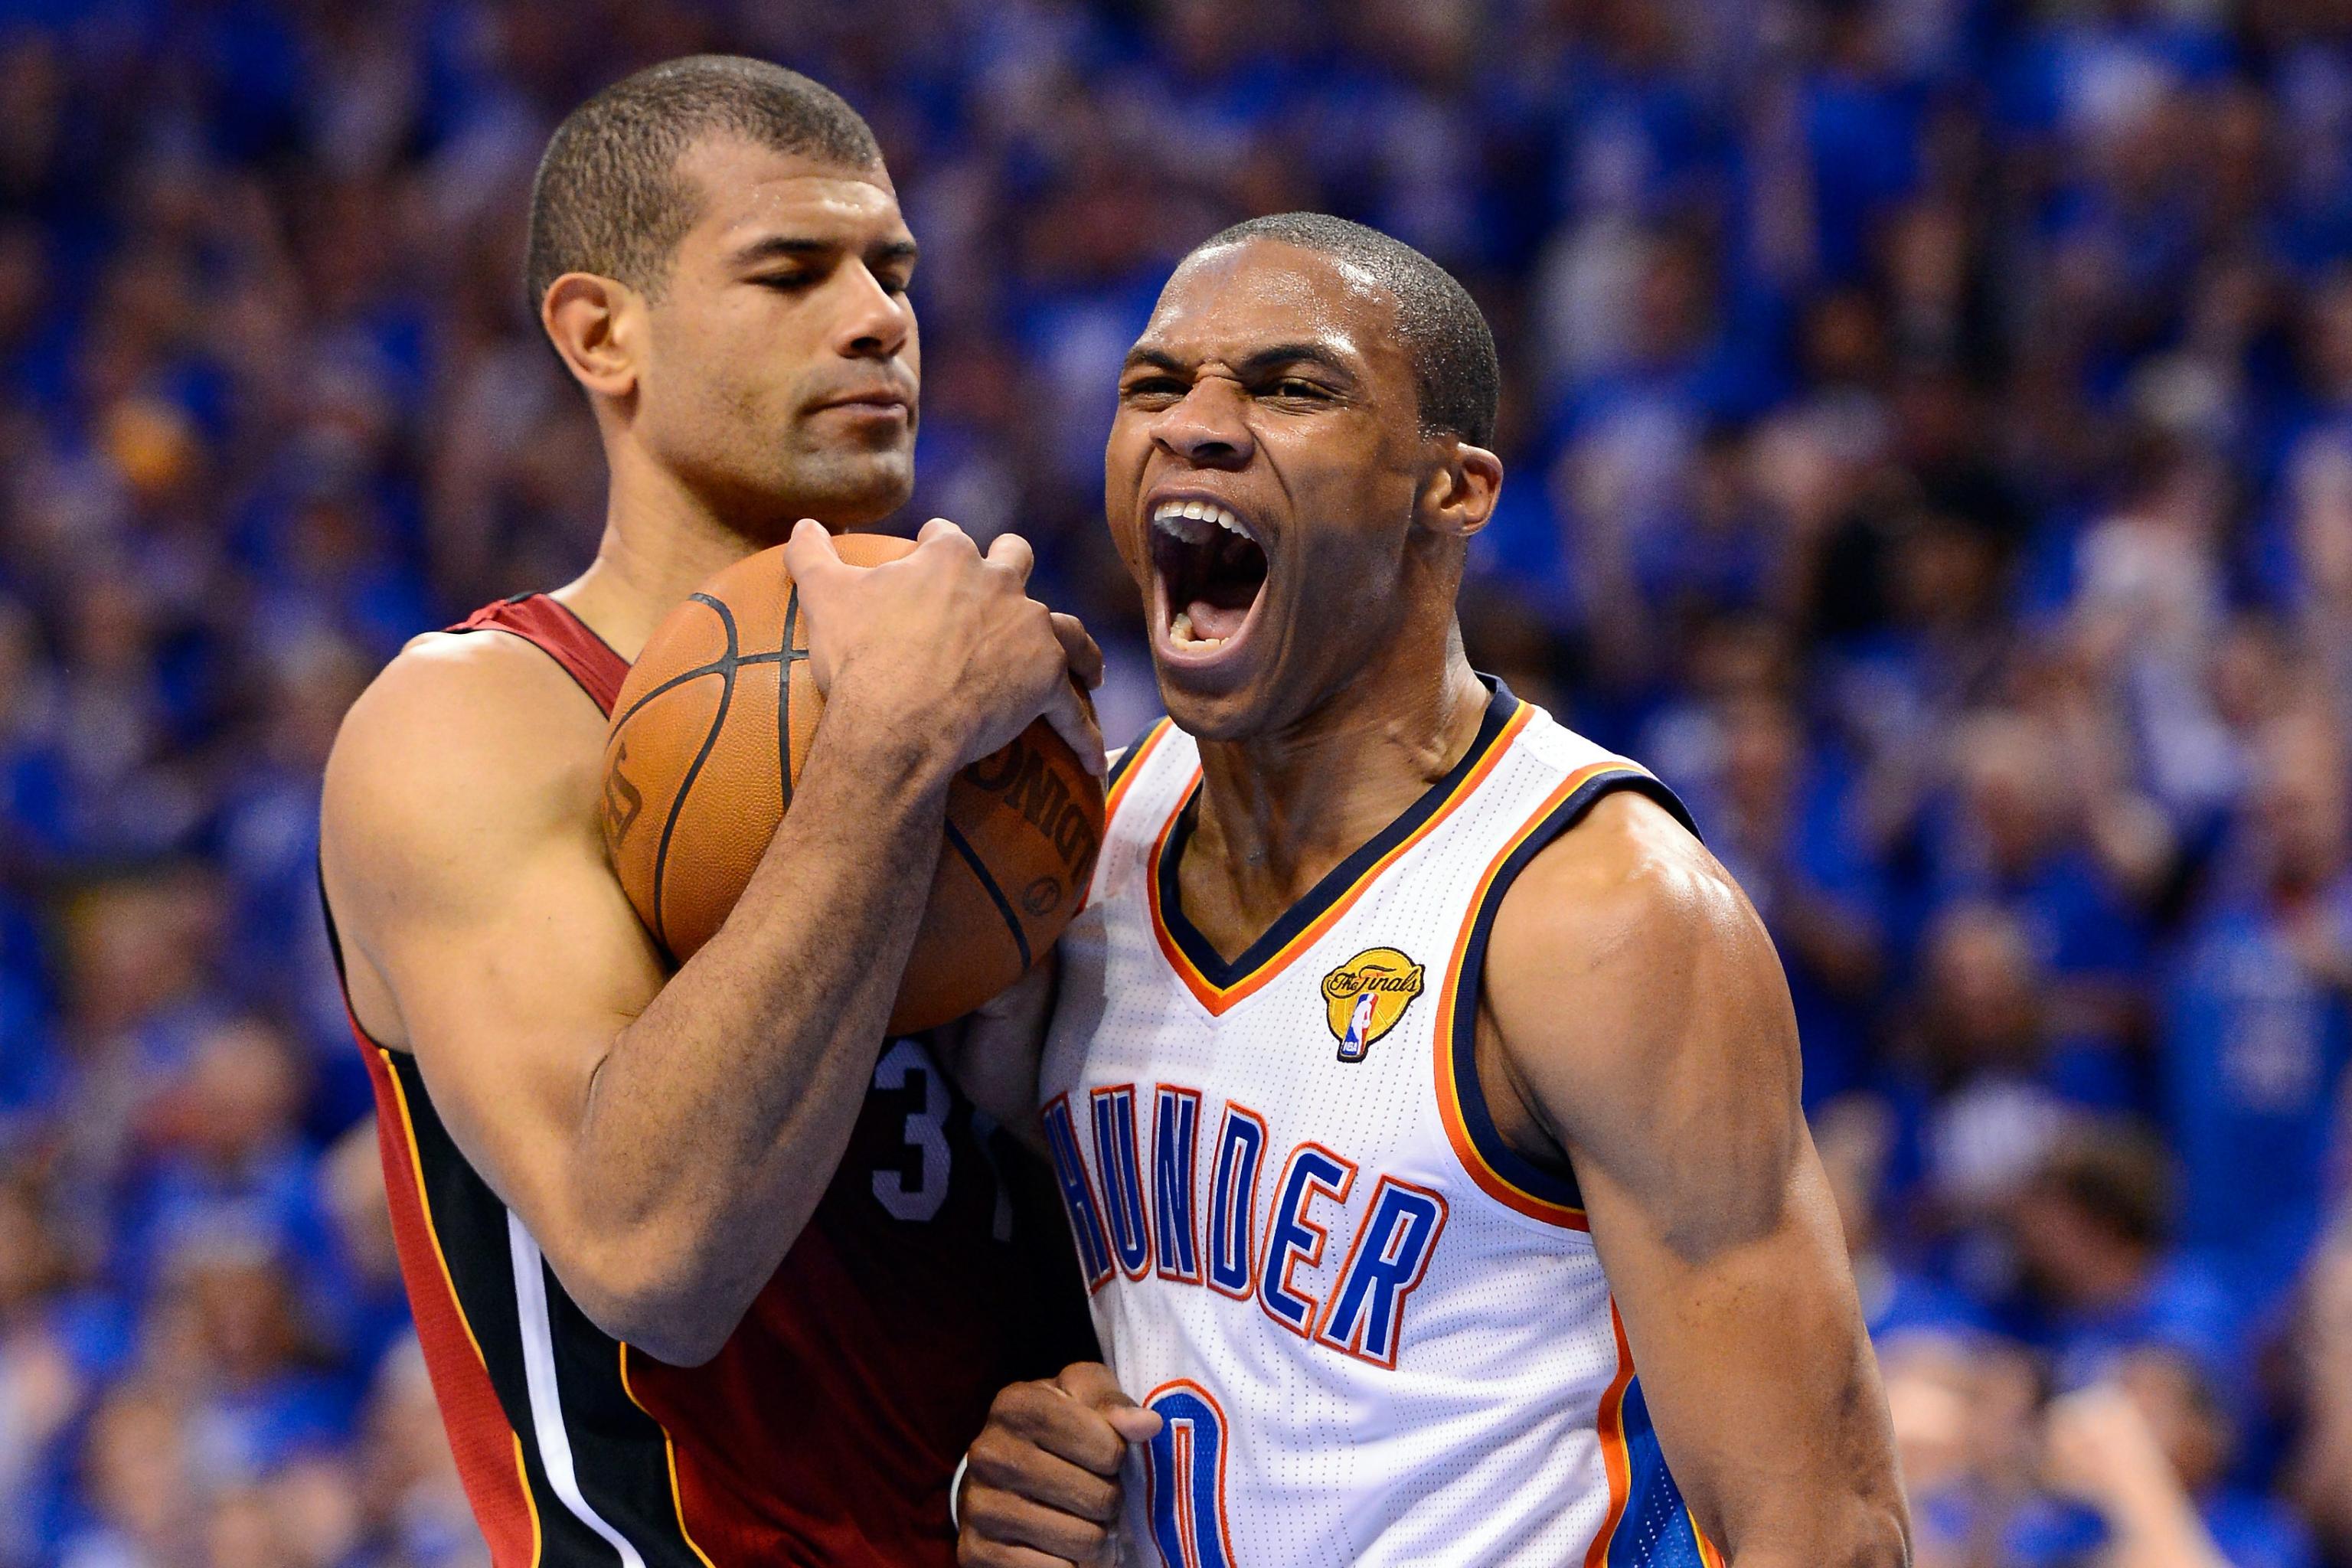 Thunder's Russell Westbrook brings improving game into NBA Finals